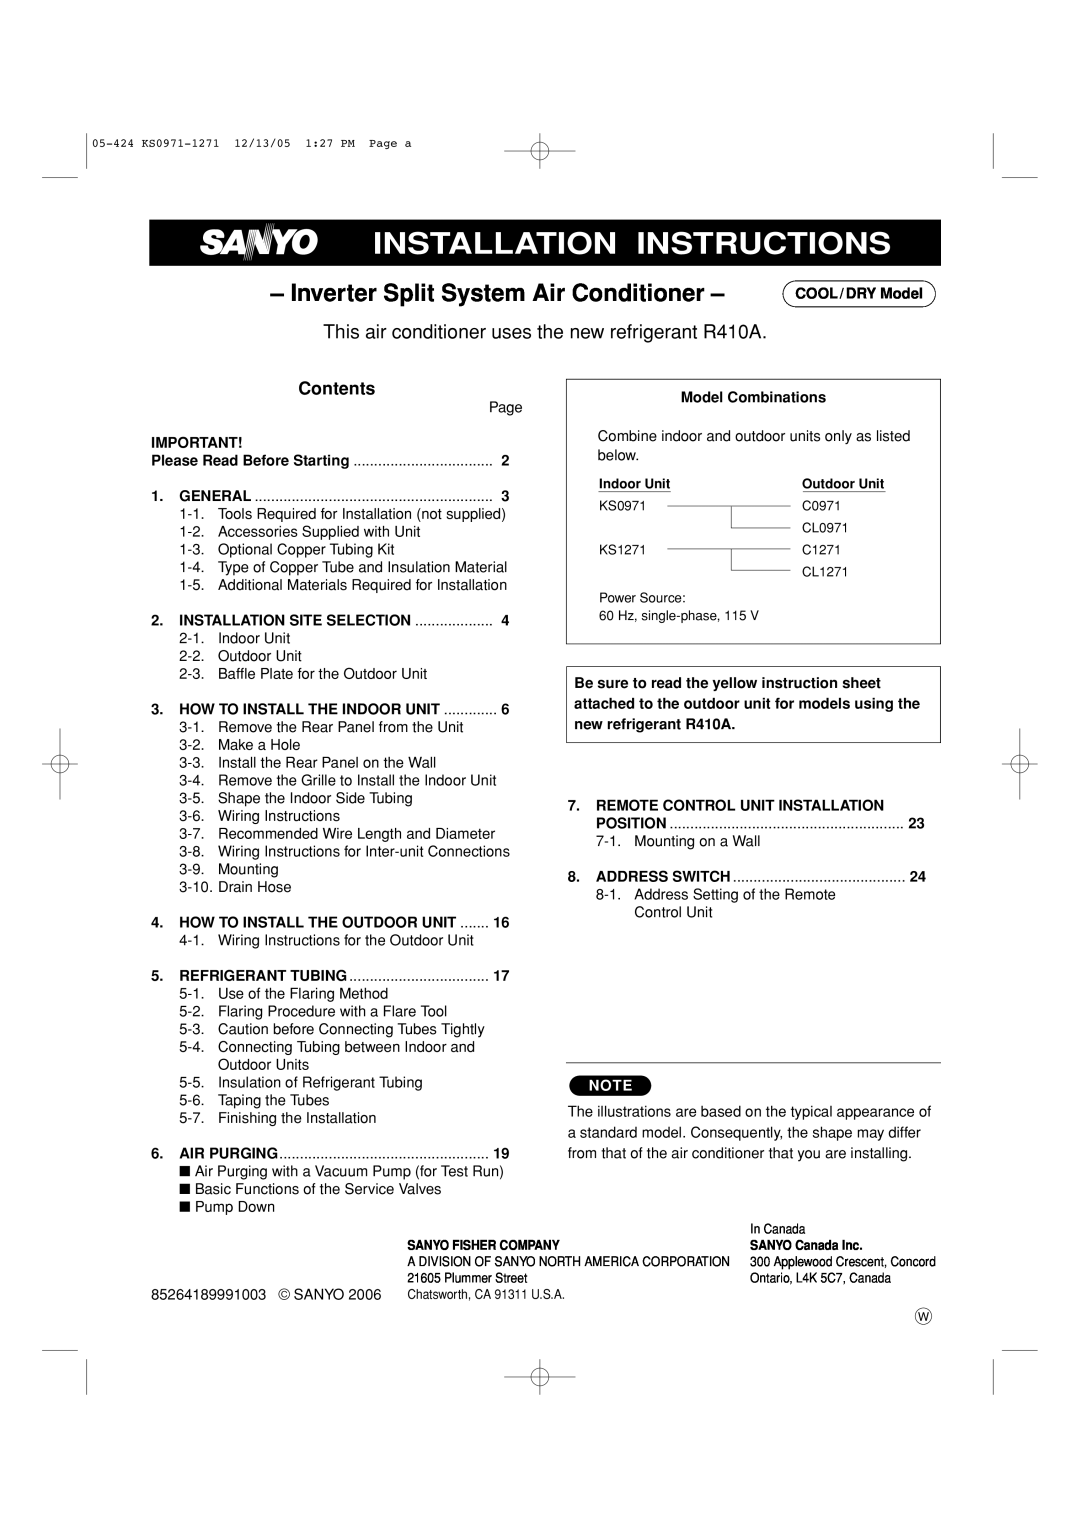 Sanyo Cool/Dry installation instructions Inverter Split System Air Conditioner, Contents, Installation Instructions 